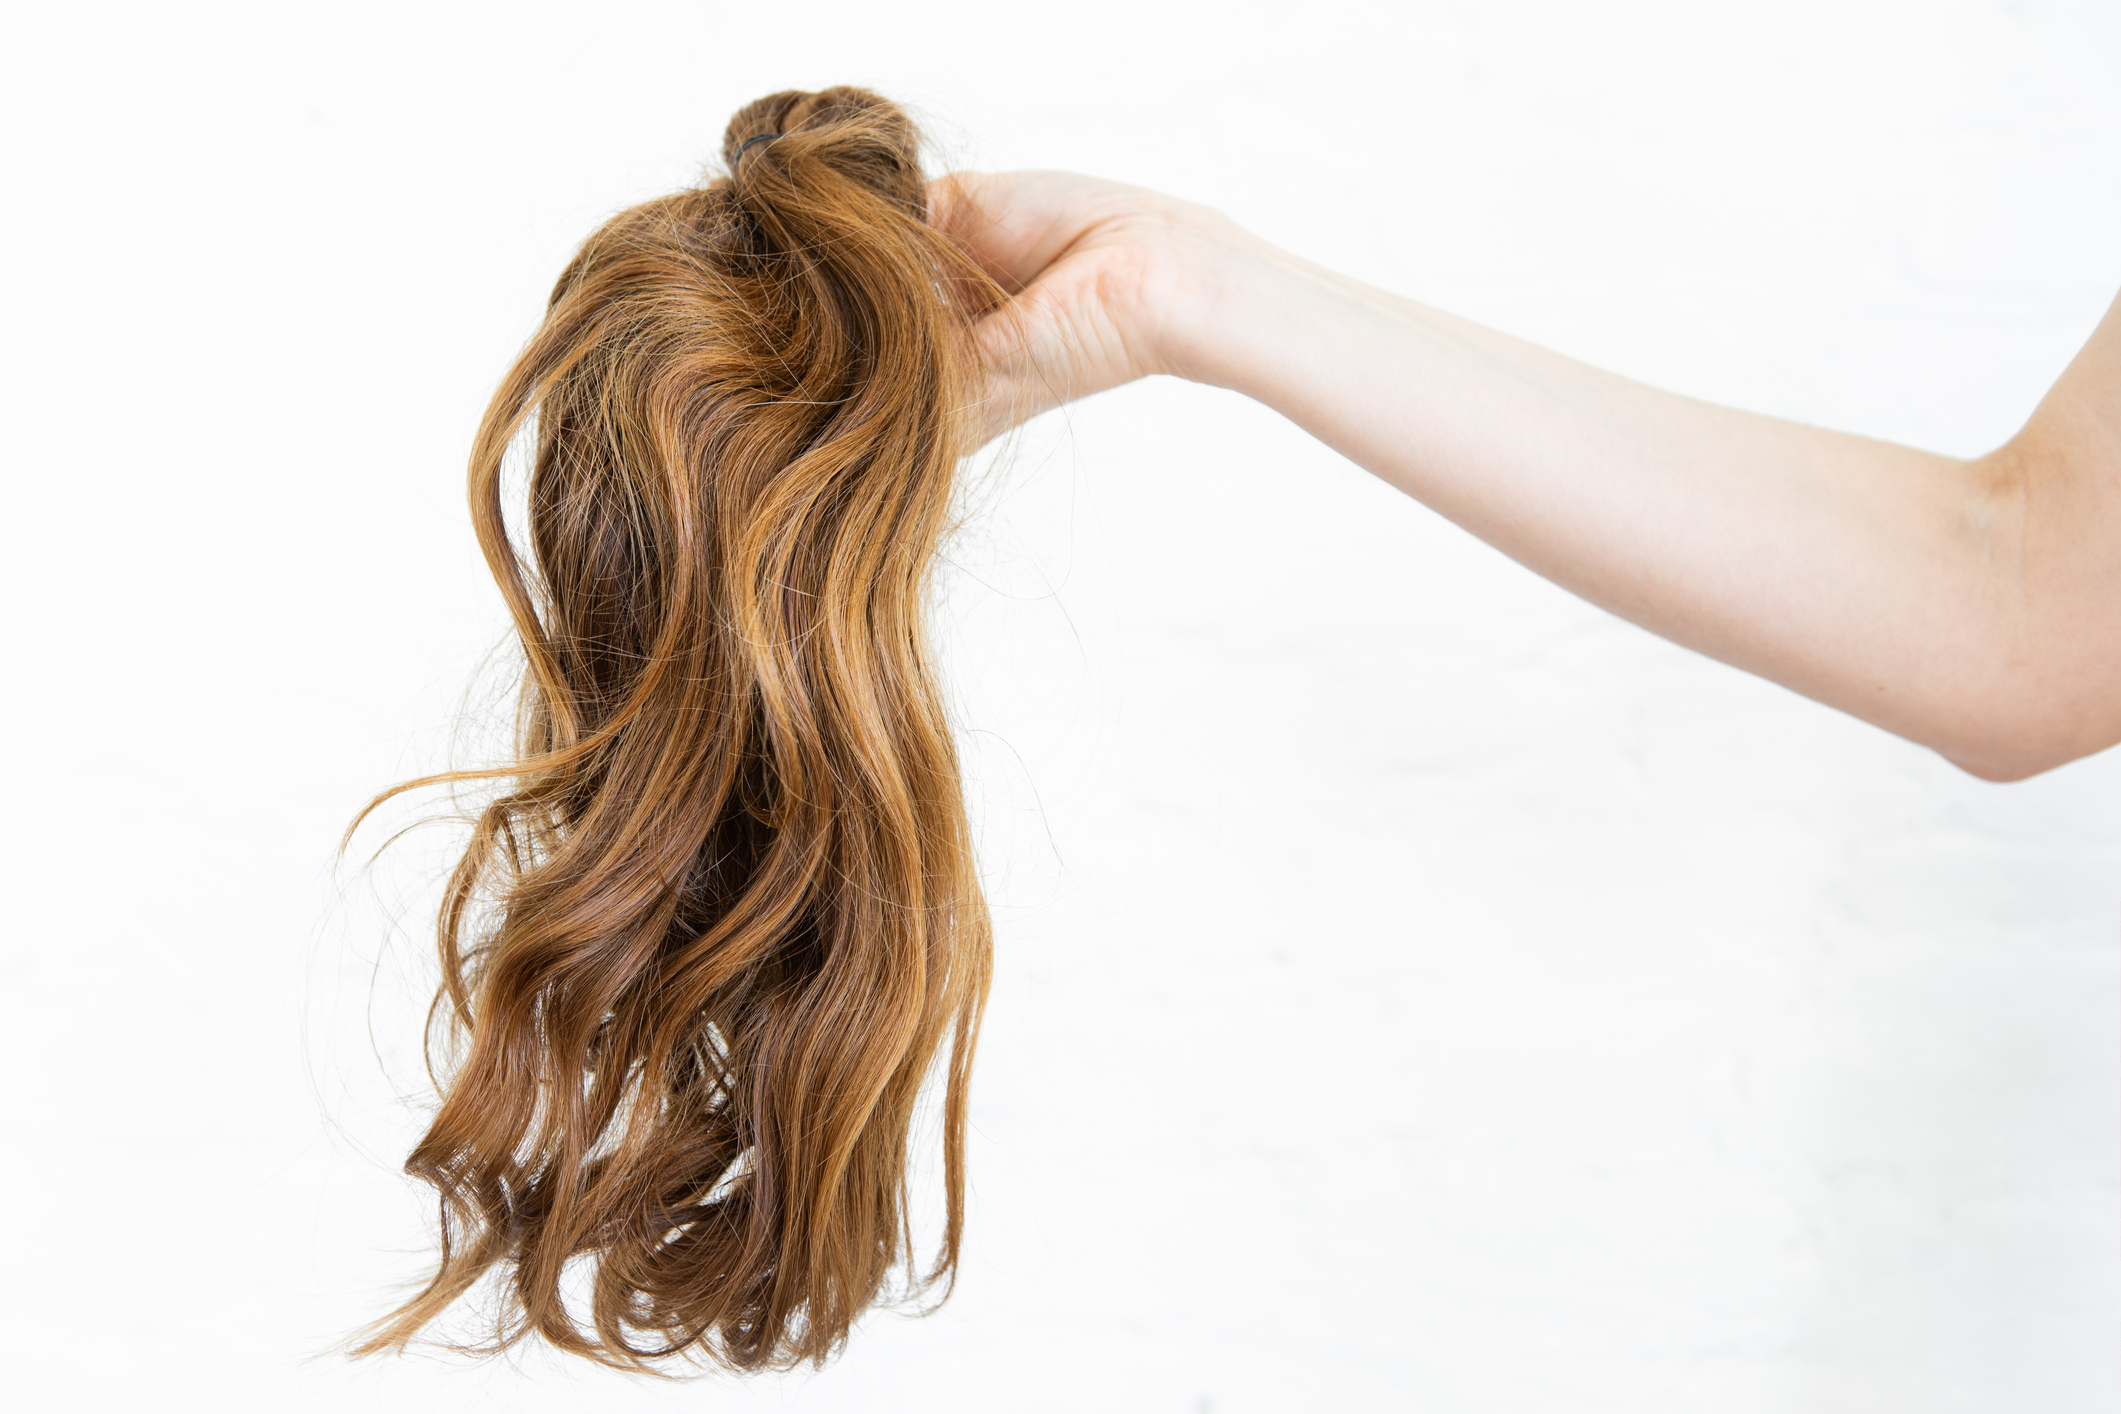 Hand holding a wavy hair extensions piece against a white background